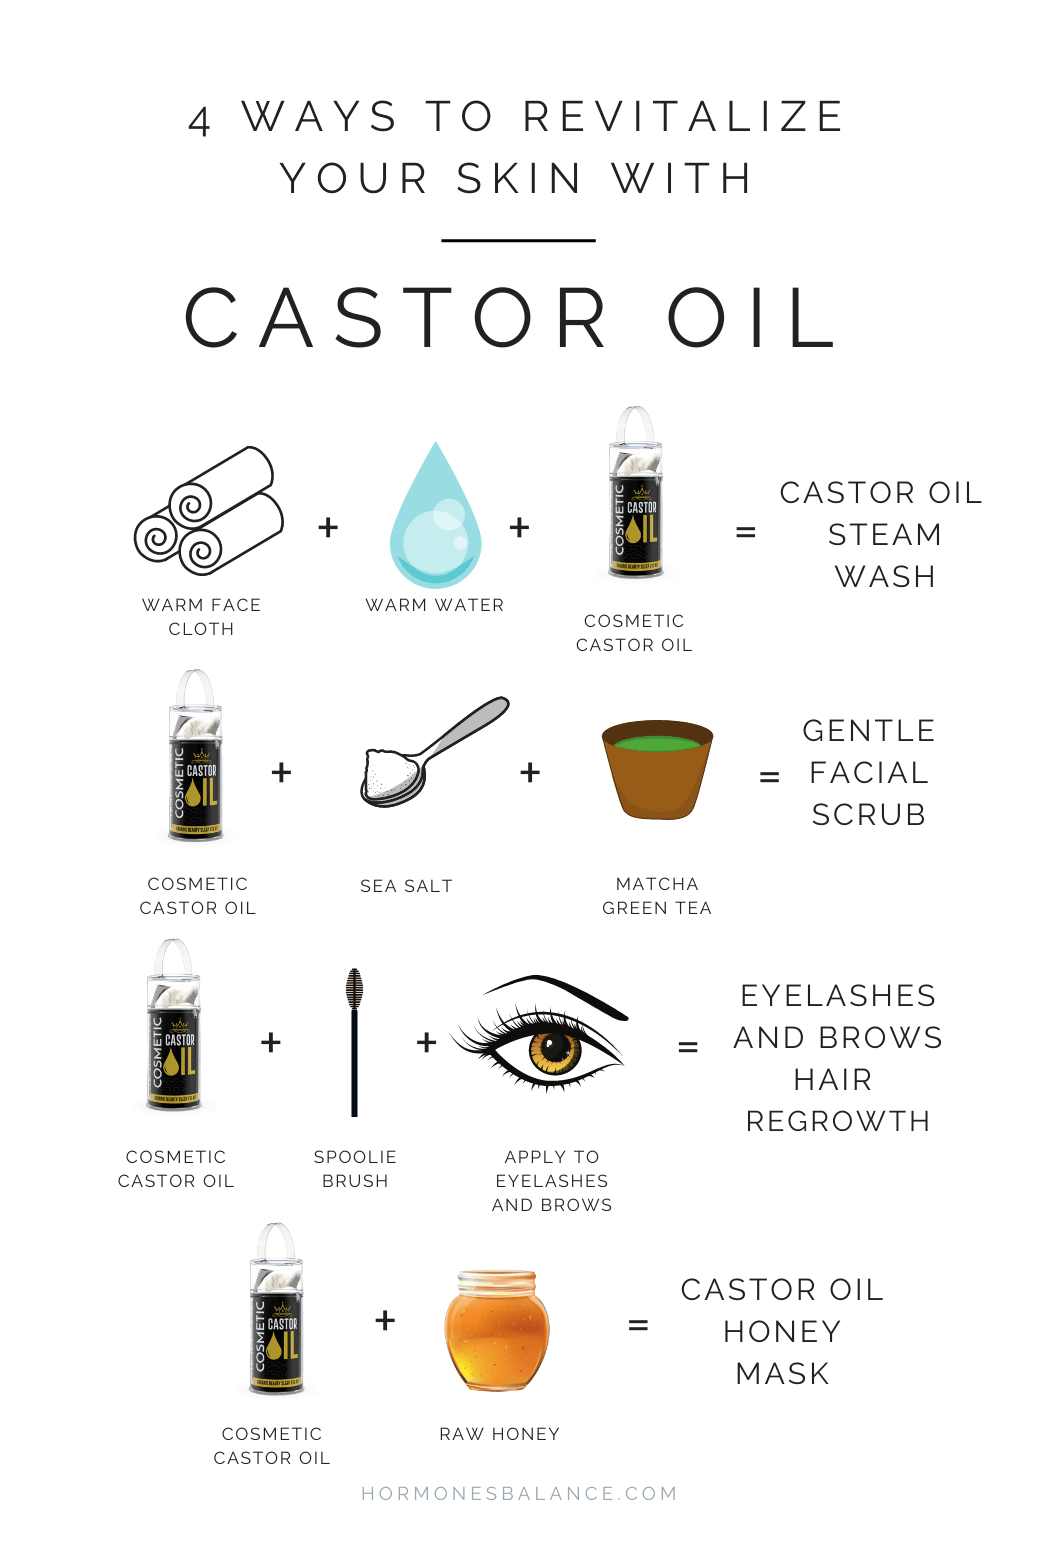 I want to share with you my easy weekly routine to take care of my skin, using only the most natural of natural ingredients: Castor oil.